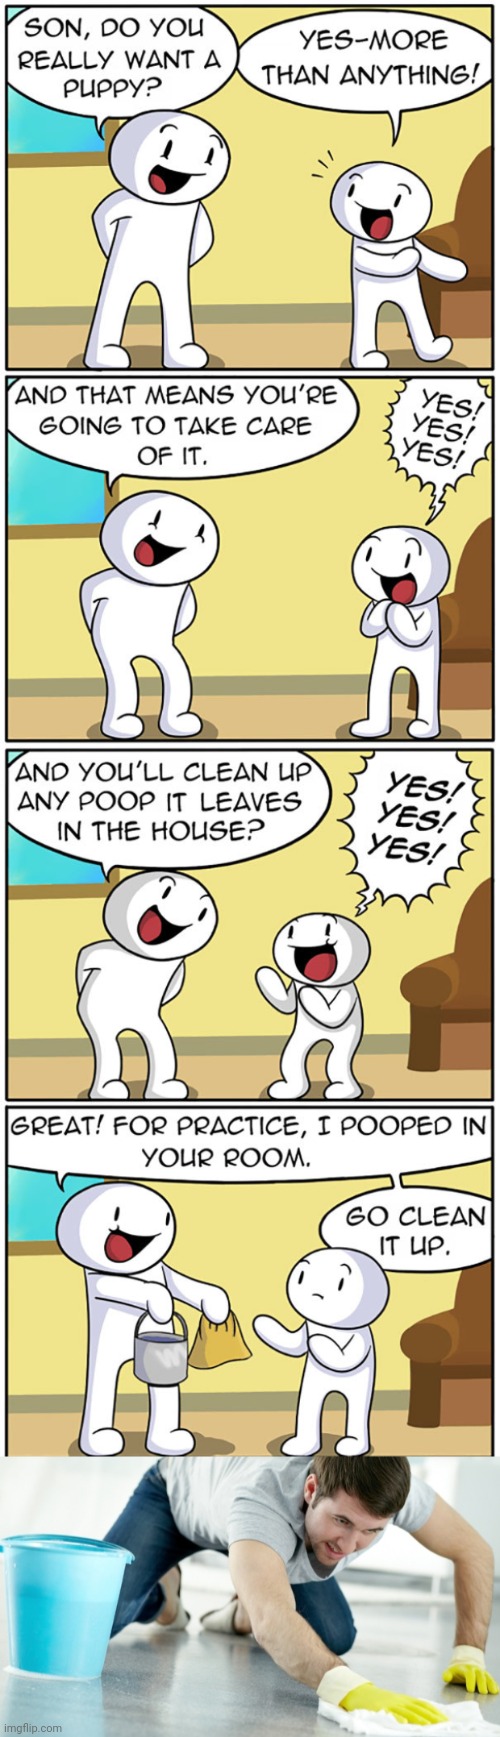 Cleaning up | image tagged in man cleaning,puppy,memes,comics,comics/cartoons,poop | made w/ Imgflip meme maker